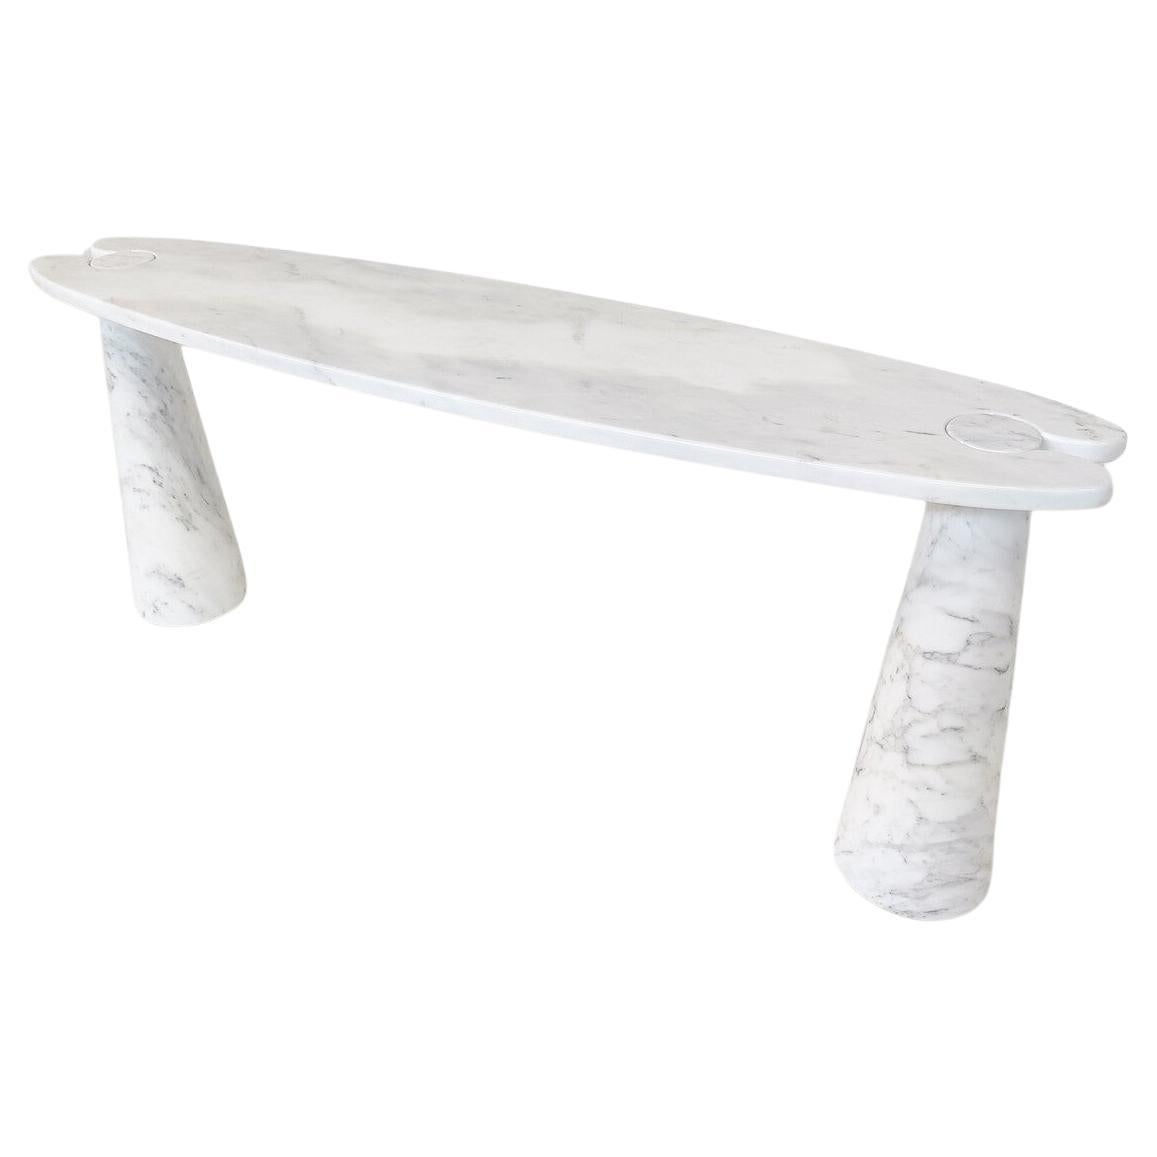 Midcentury Eros Console by Angelo Mangiarotti for Skipper, White Marble, 1980s